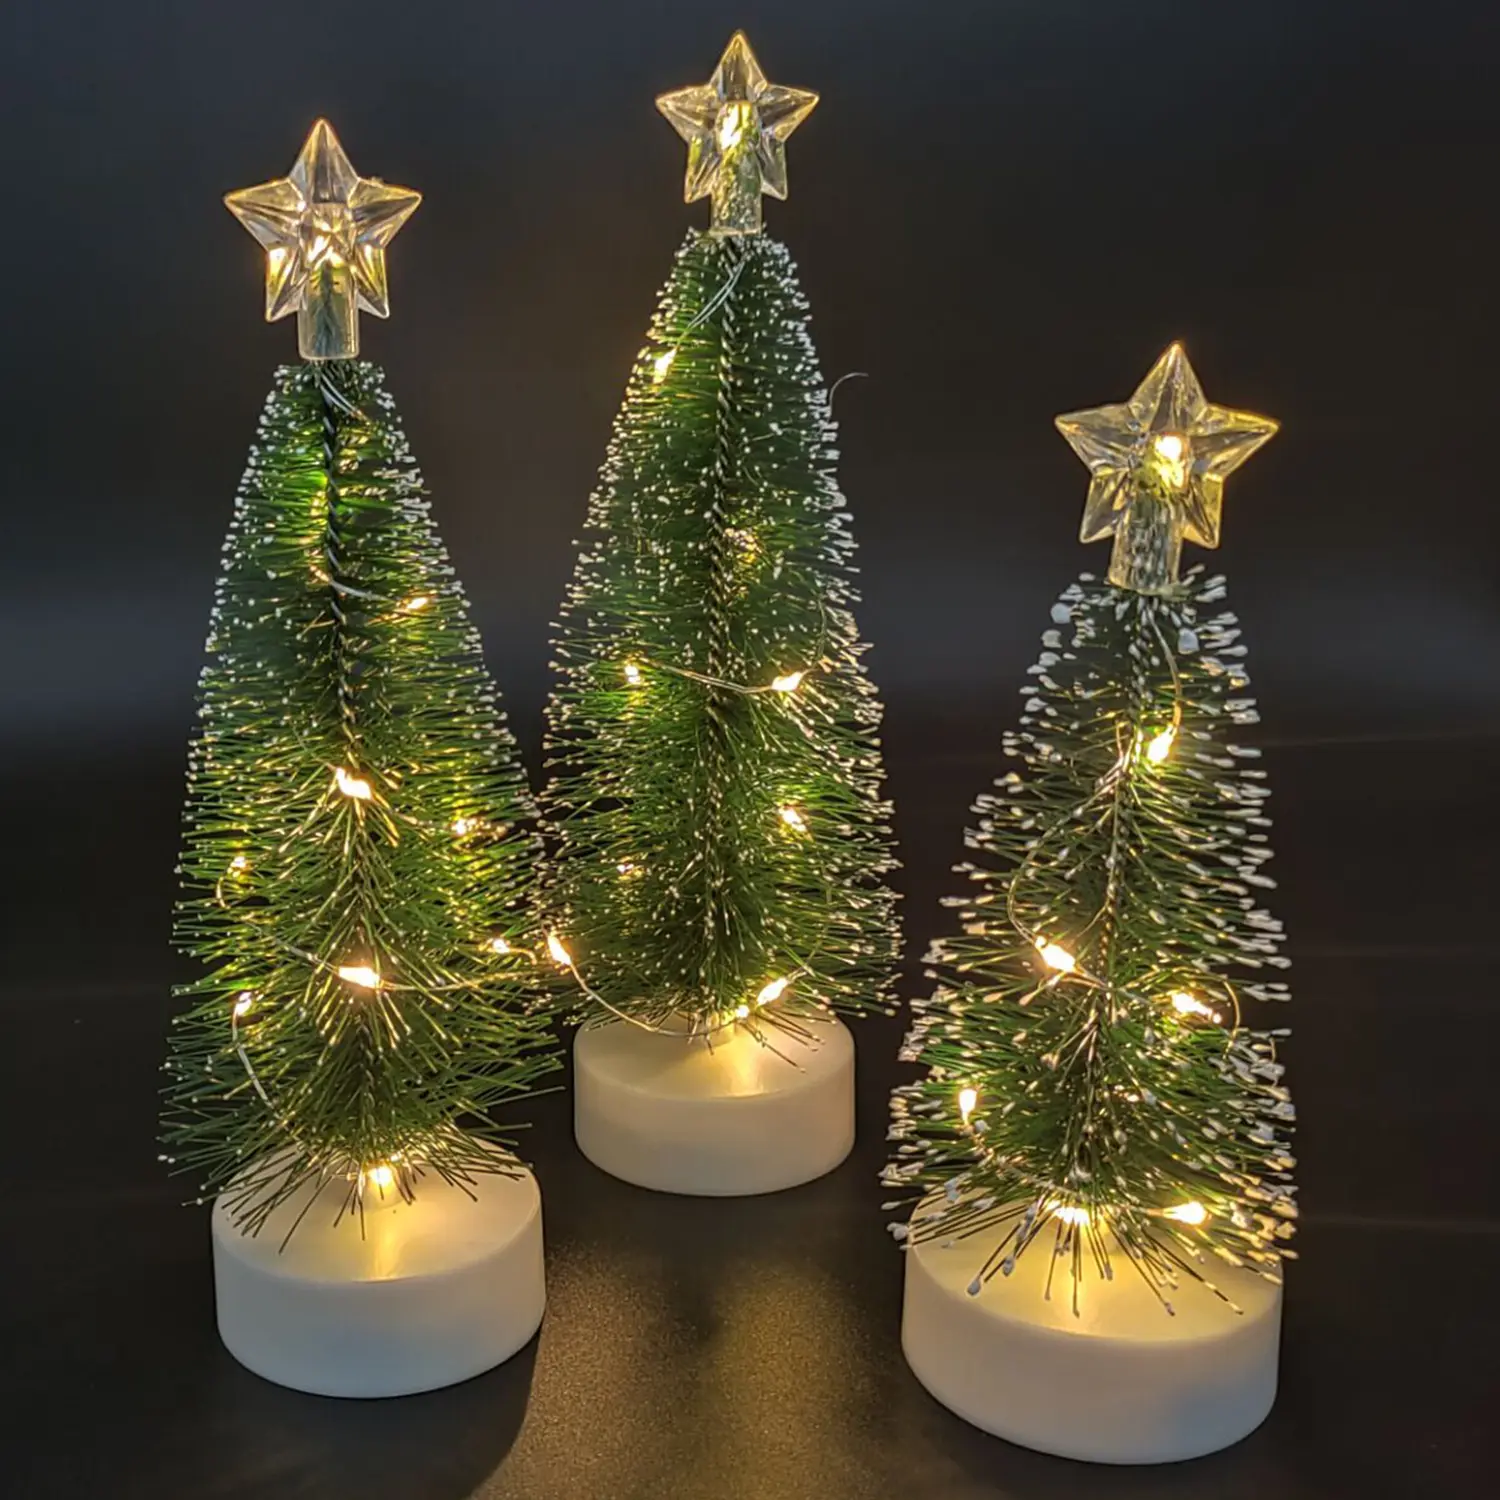 O19S Pop up Mini artificial white Christmas Tree with led strip lights on sale warm light xmas decorations for merry christmas